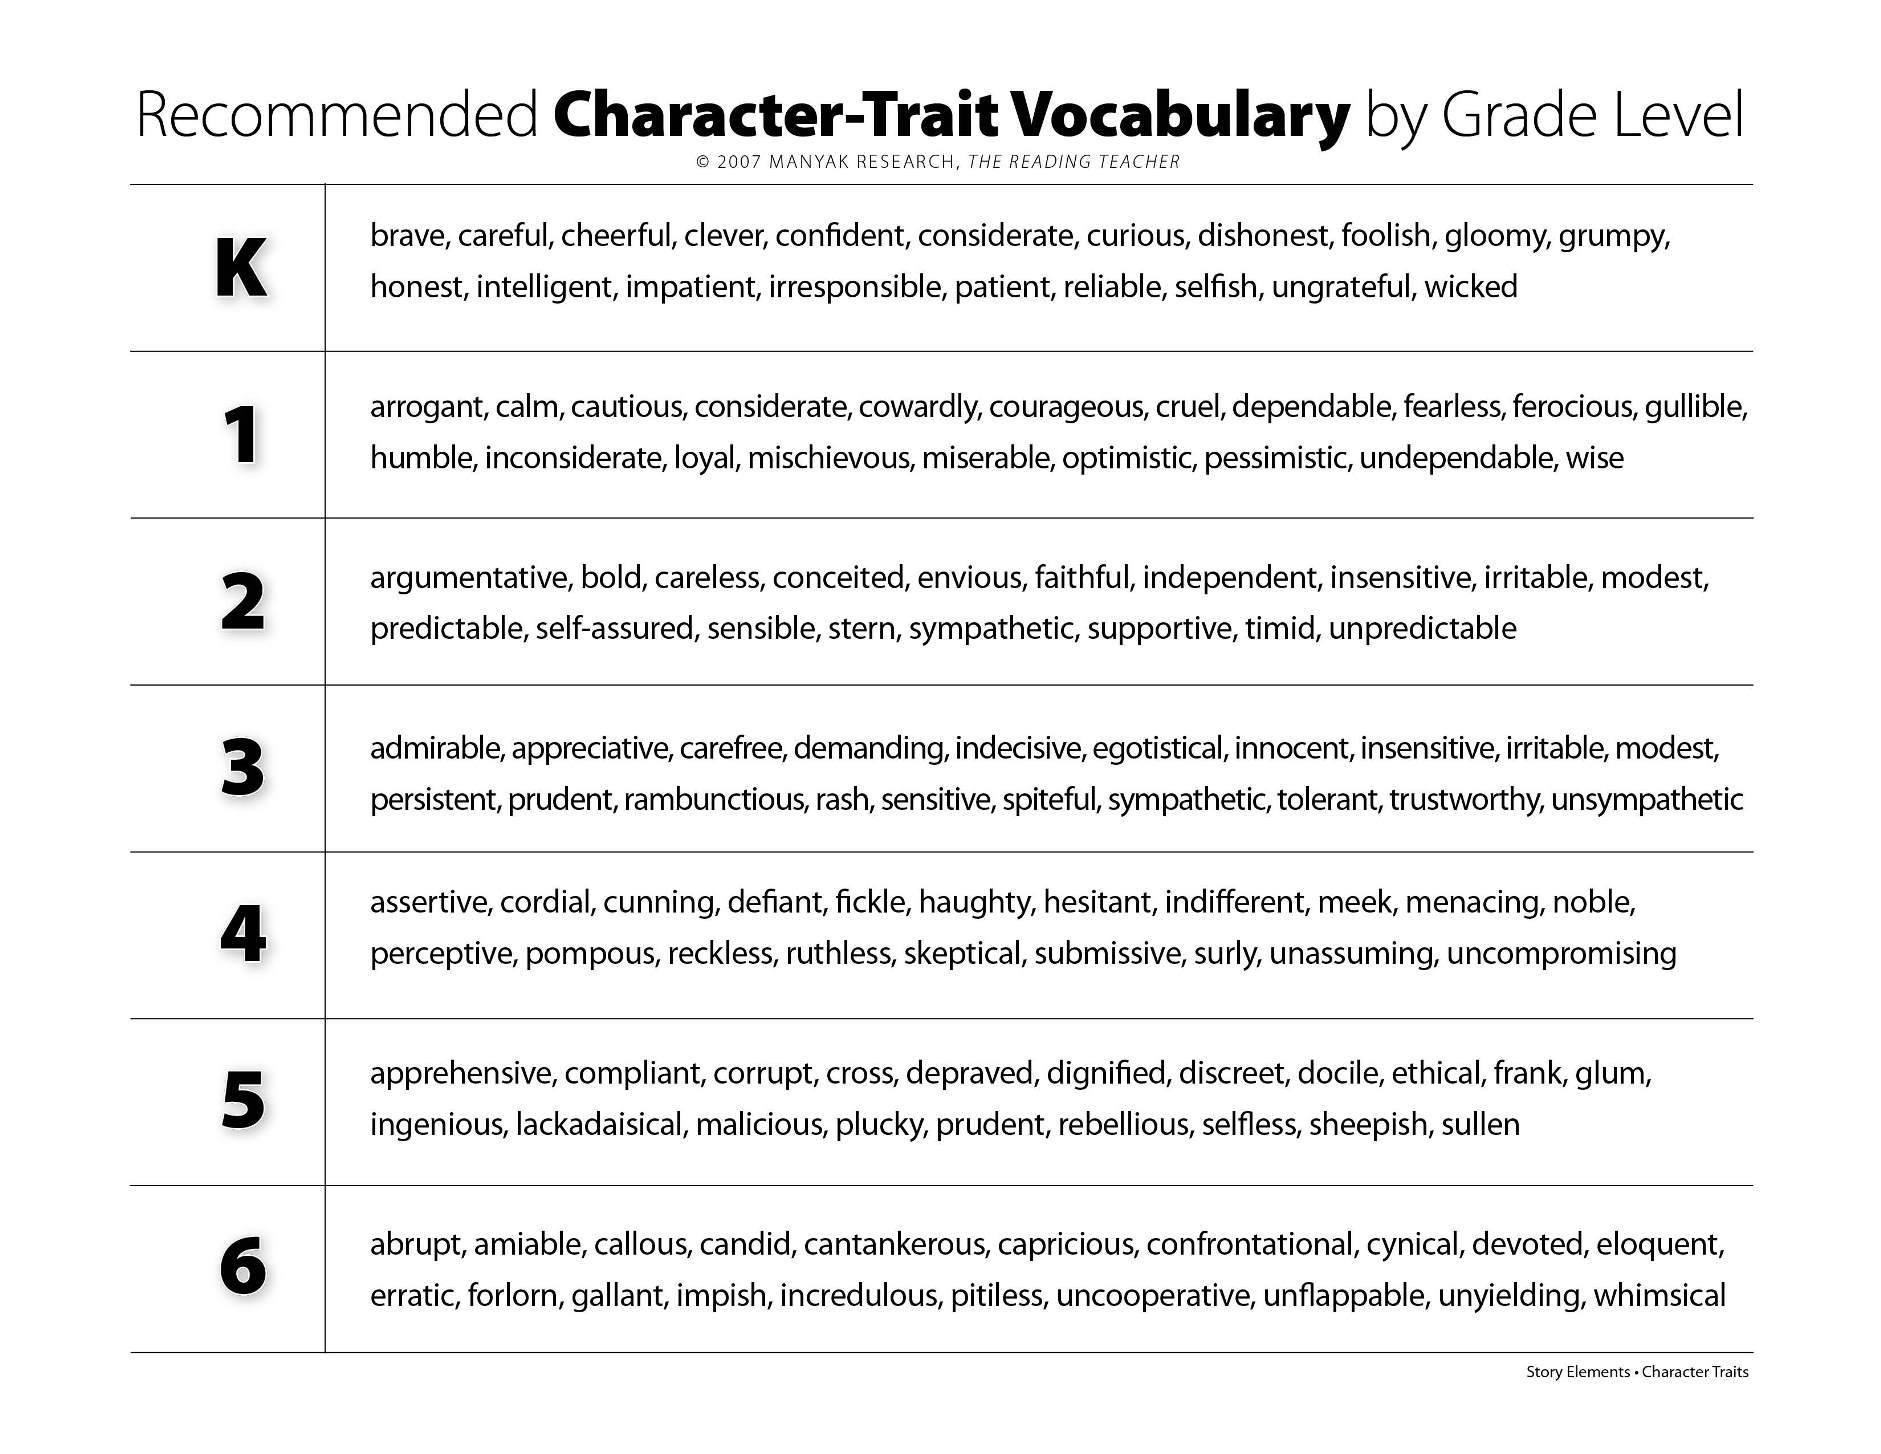 Character Traits by Grade Level - Teacher Resource